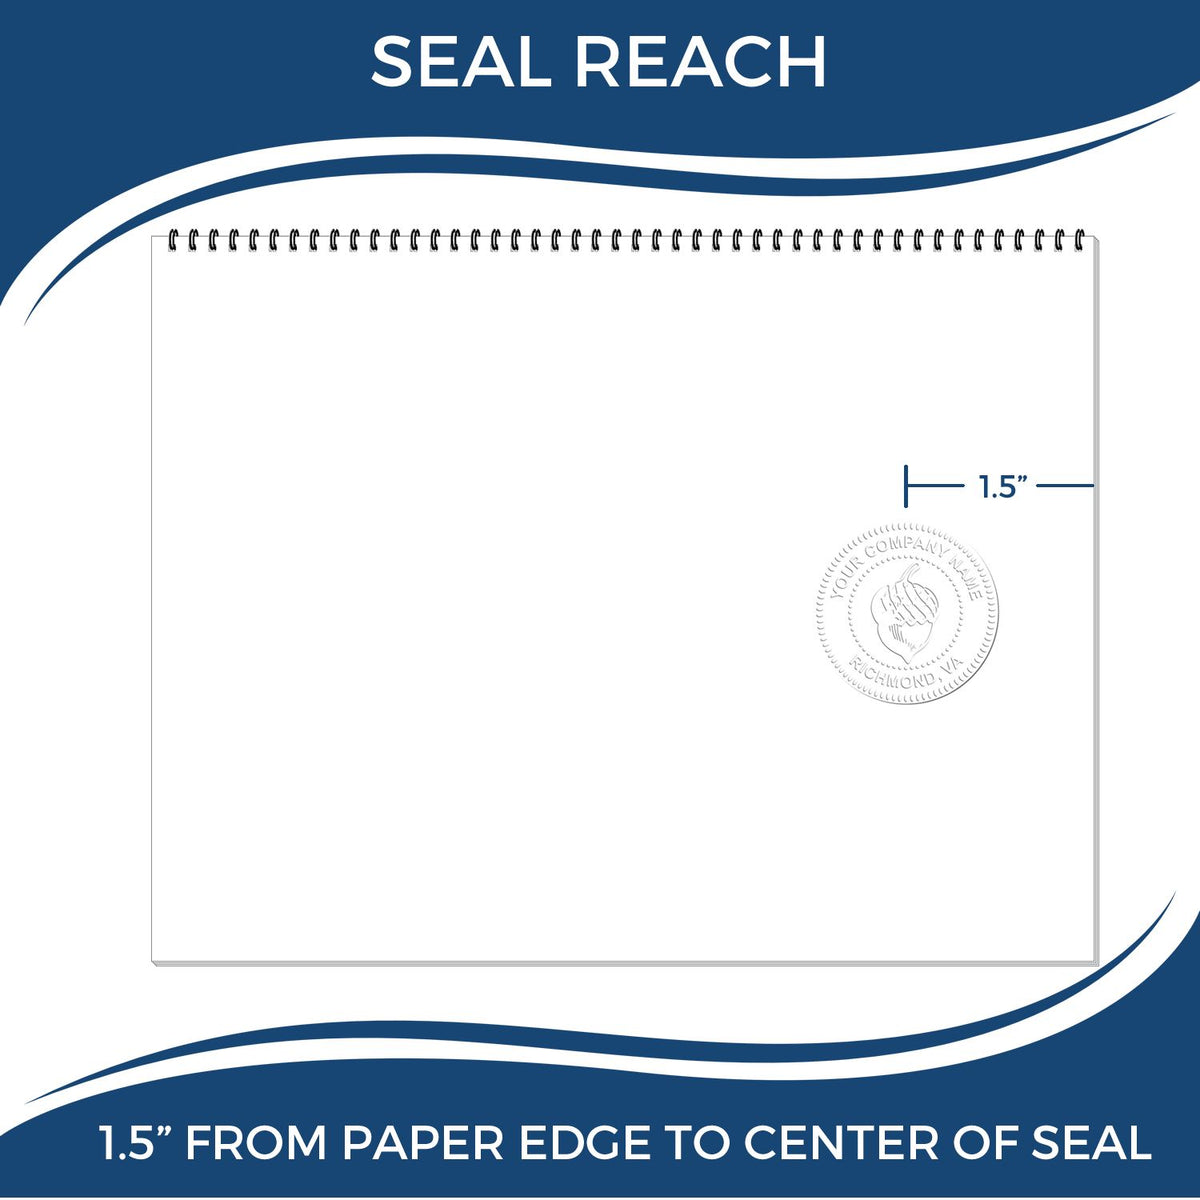 An infographic showing the seal reach which is represented by a ruler and a miniature seal image of the Handheld Nebraska Professional Engineer Embosser